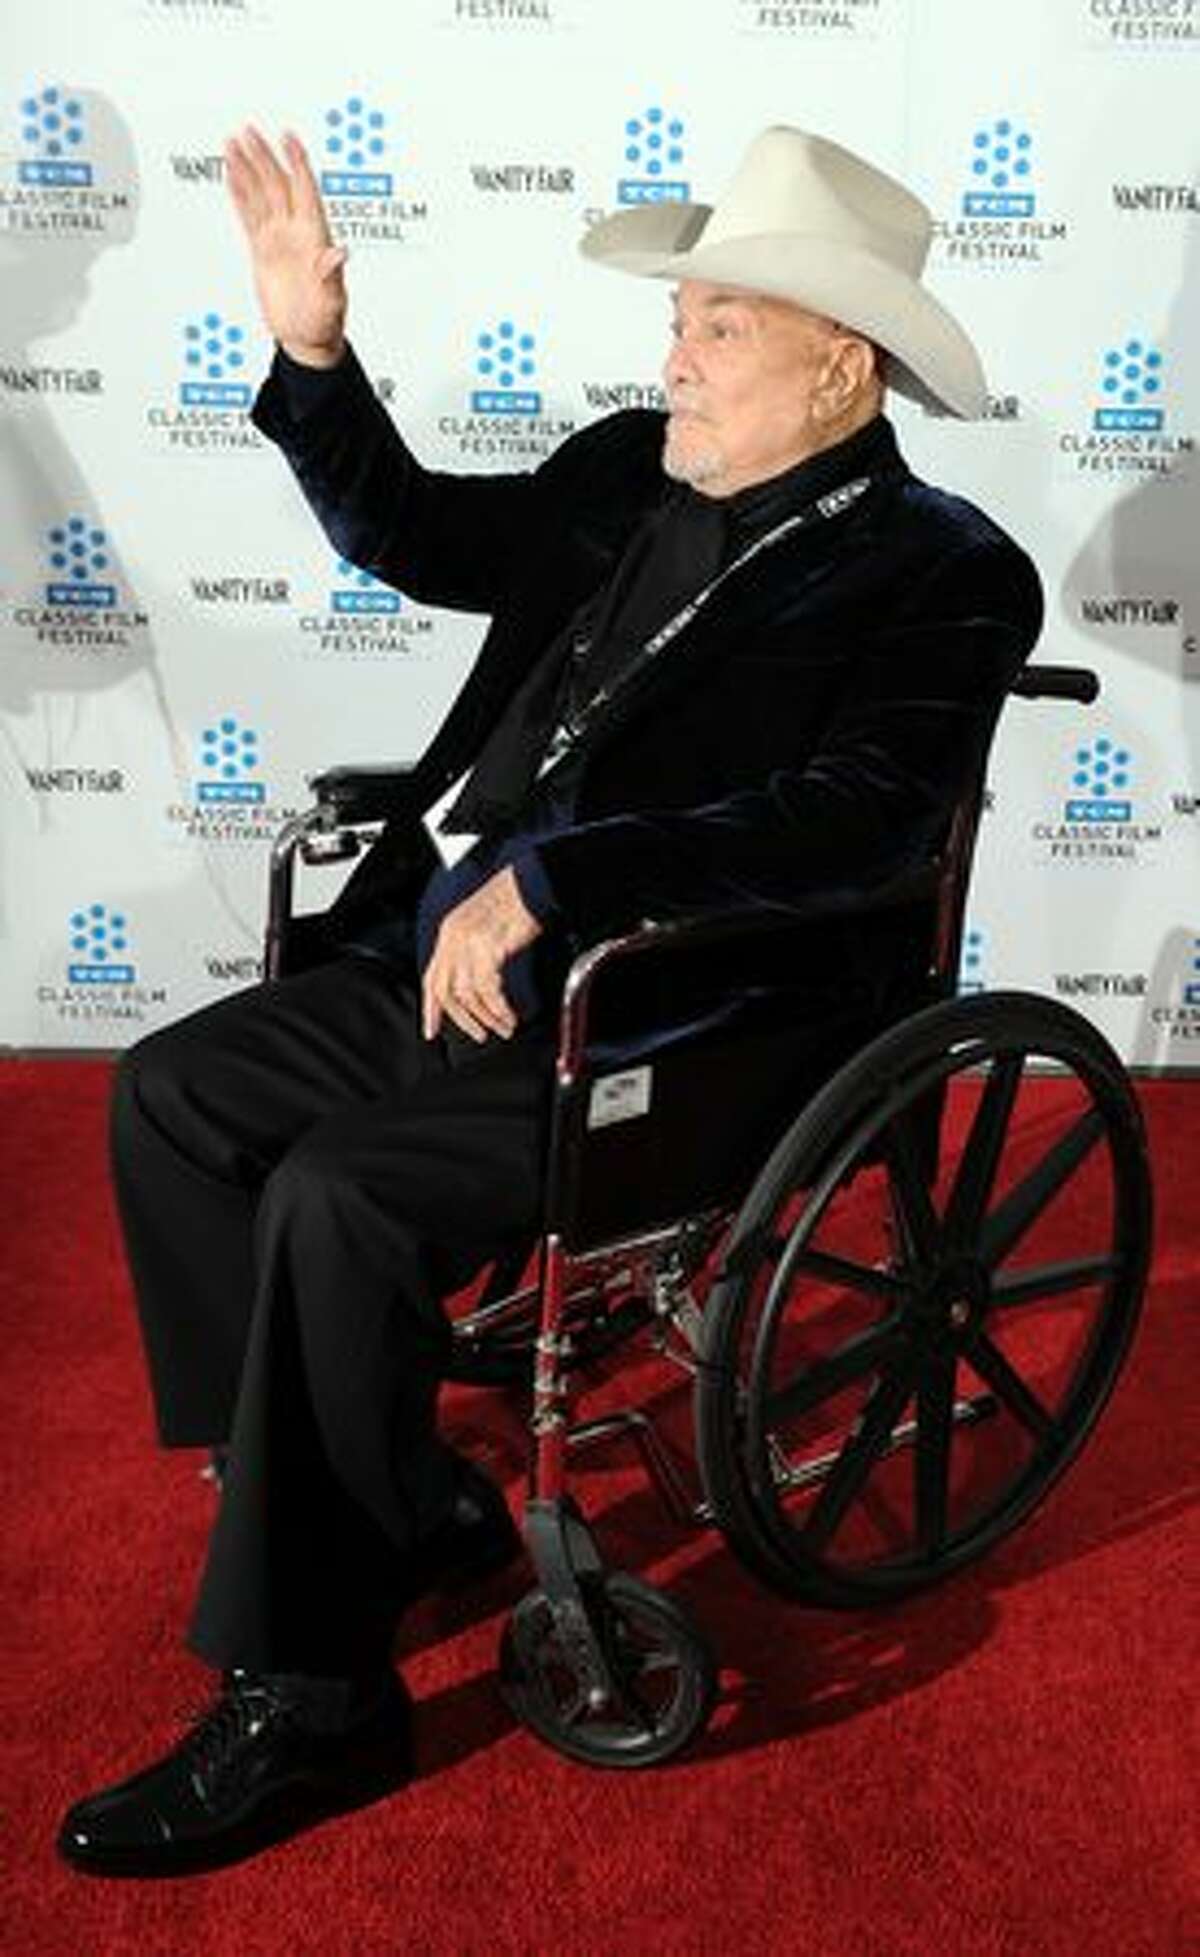 Actor Tony Curtis arrives at the world premiere of the restored "A Star is Born" during the opening Night Gala of the 2010 TCM Classic Film Festival in Hollywood, California, on April 22, 2010.